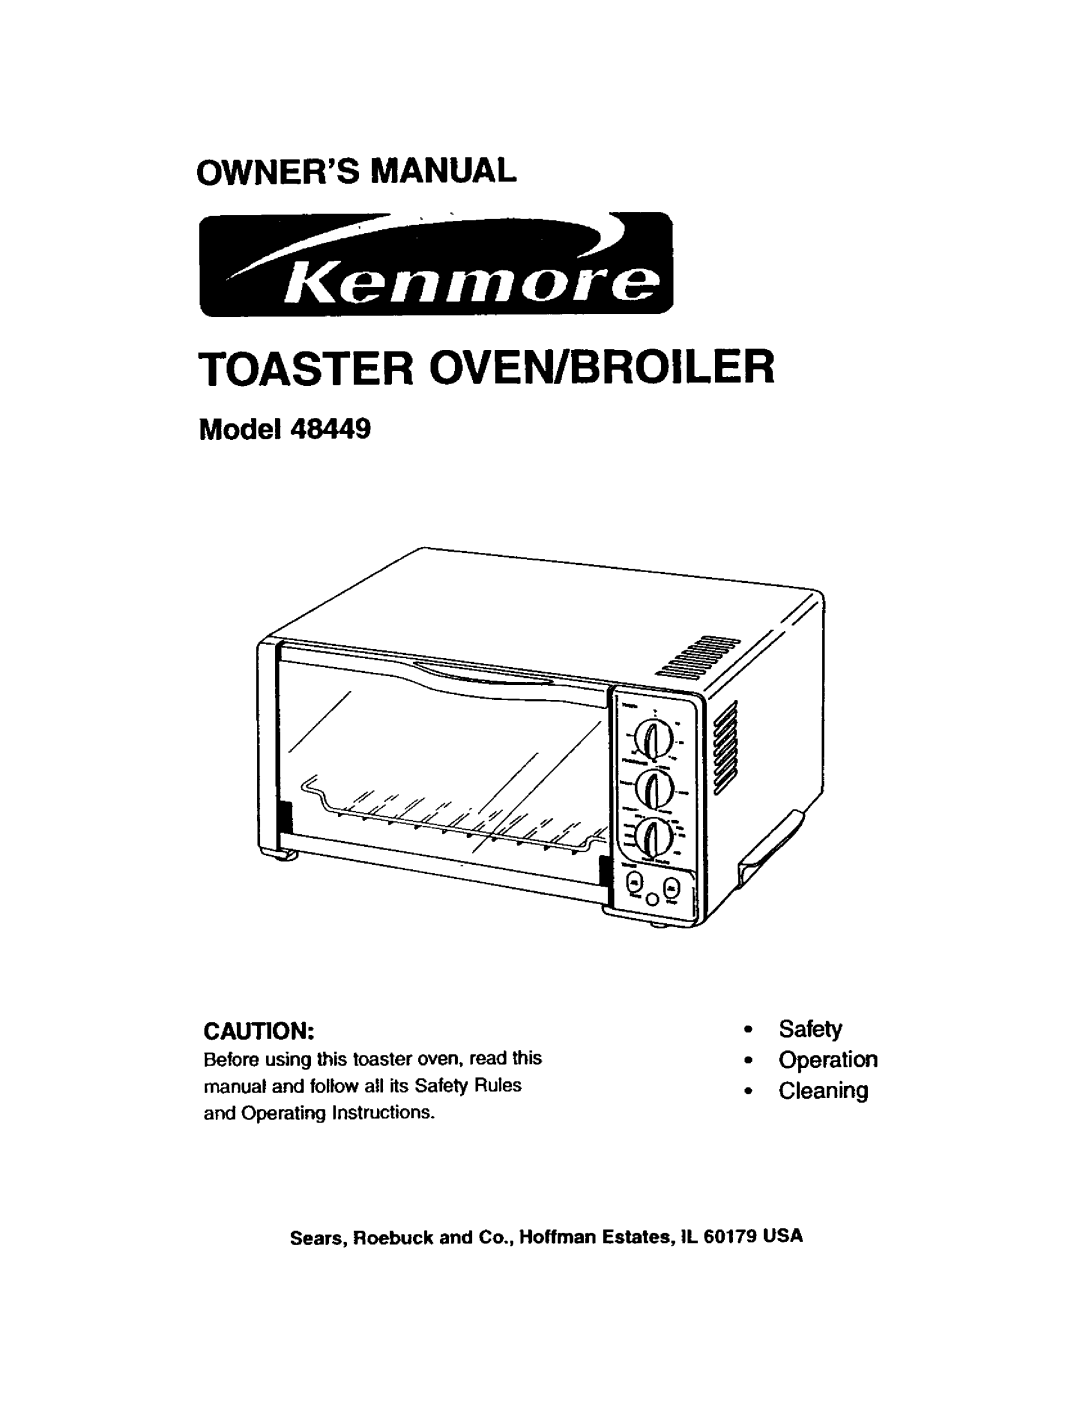 Kenmore 48449 owner manual Toaster Oven/Broiler, Safety, Operation, Cleaning, and Operating Instructions, Model 